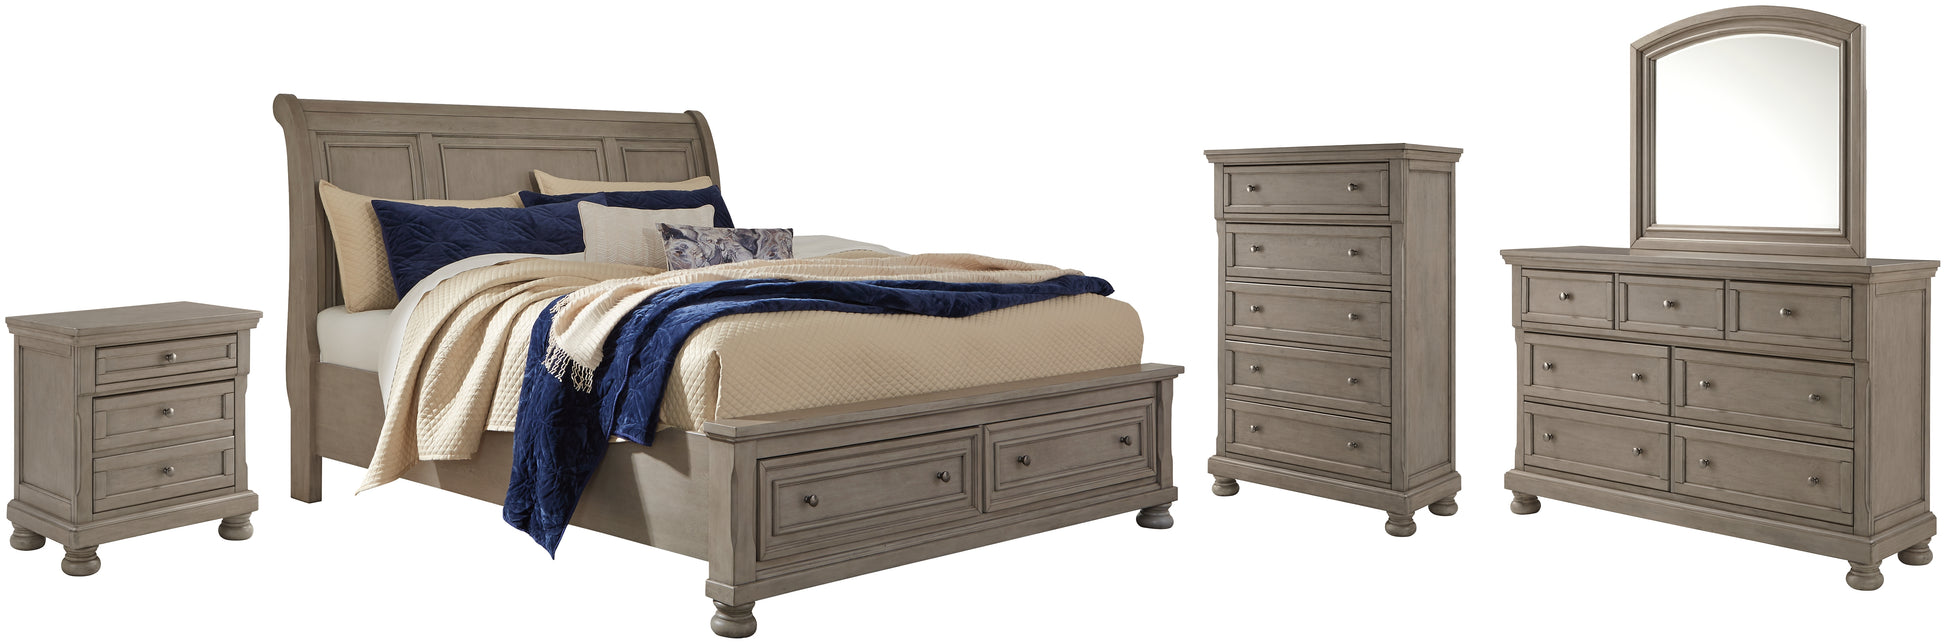 Lettner Queen Sleigh Bed with 2 Storage Drawers with Mirrored Dresser, Chest and Nightstand JB's Furniture  Home Furniture, Home Decor, Furniture Store